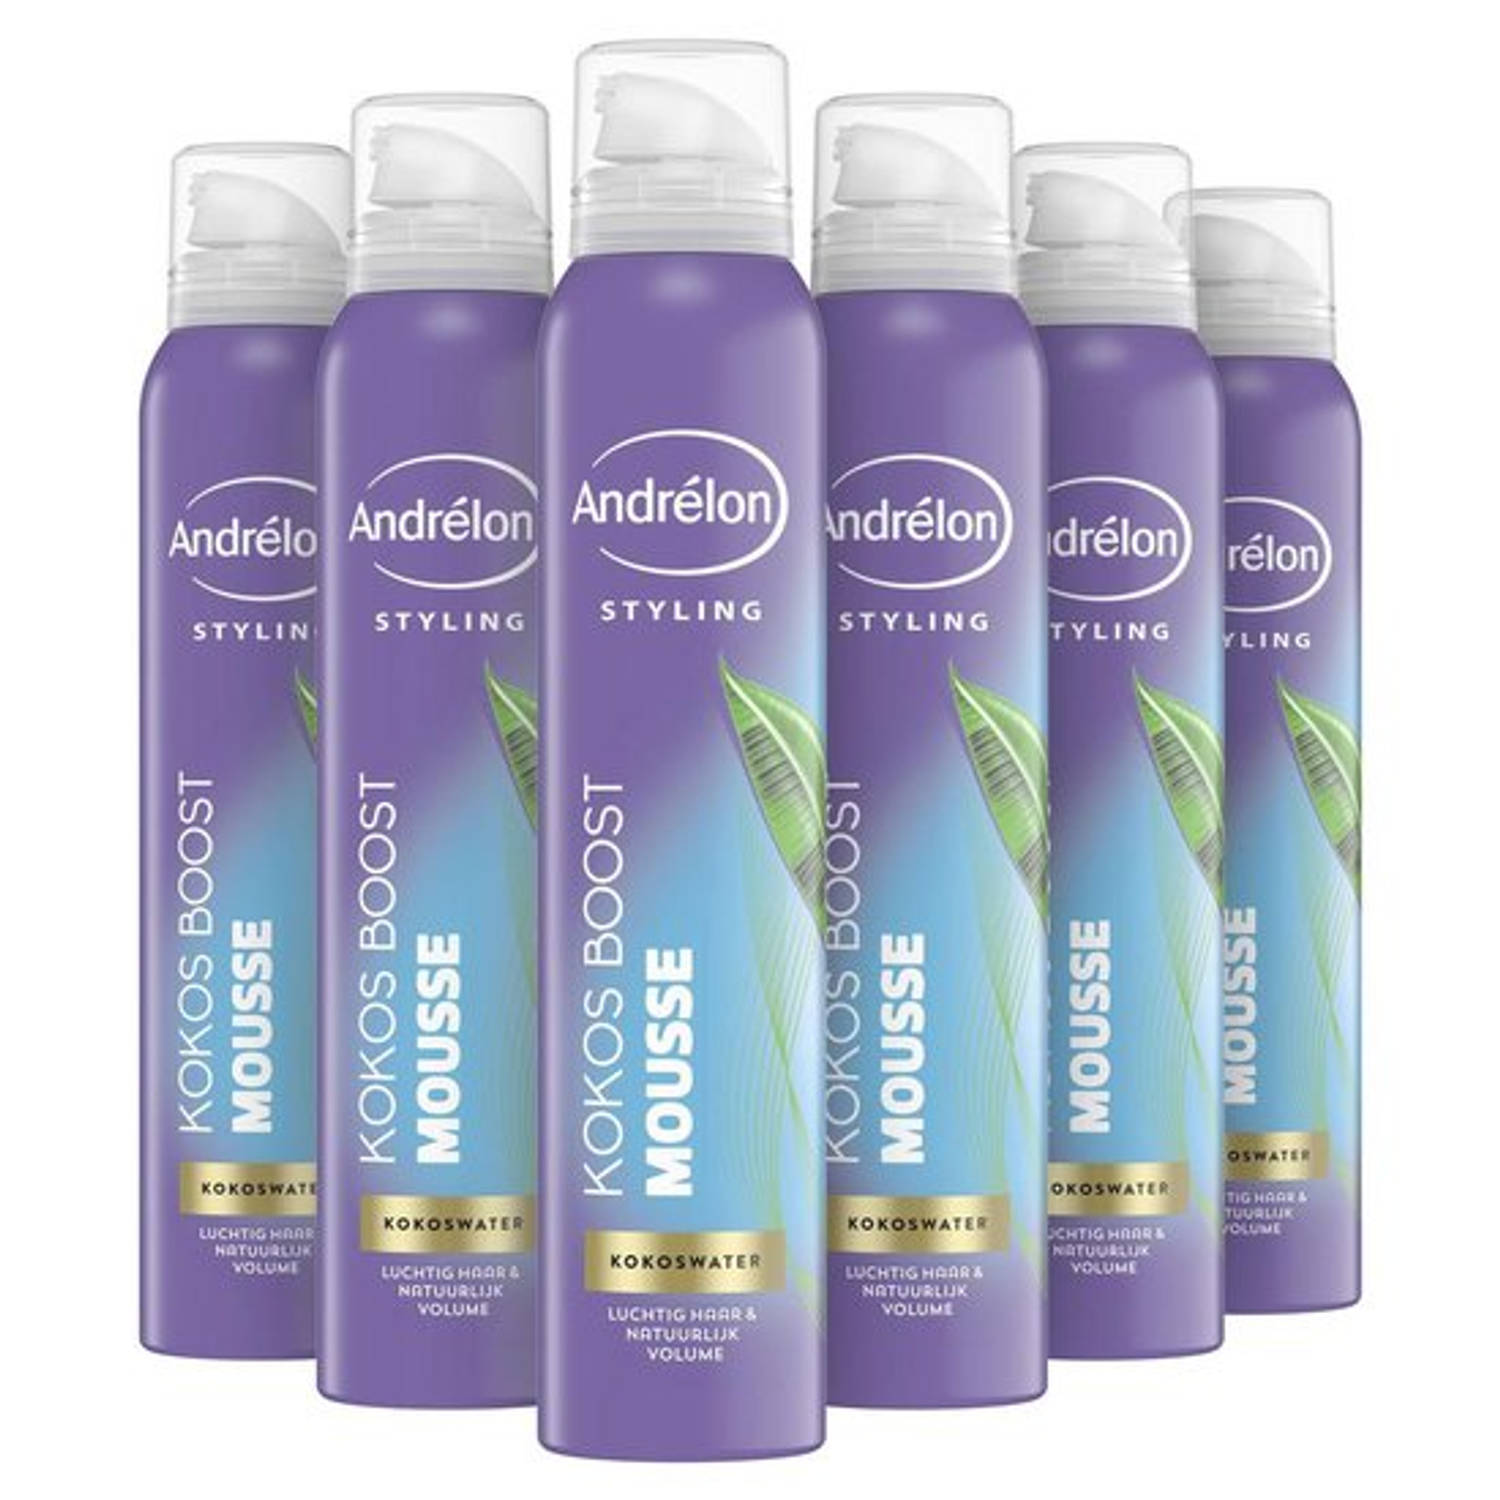 Andrelon Curl Conditioning Mousse haarmousse 6 x 200 ml